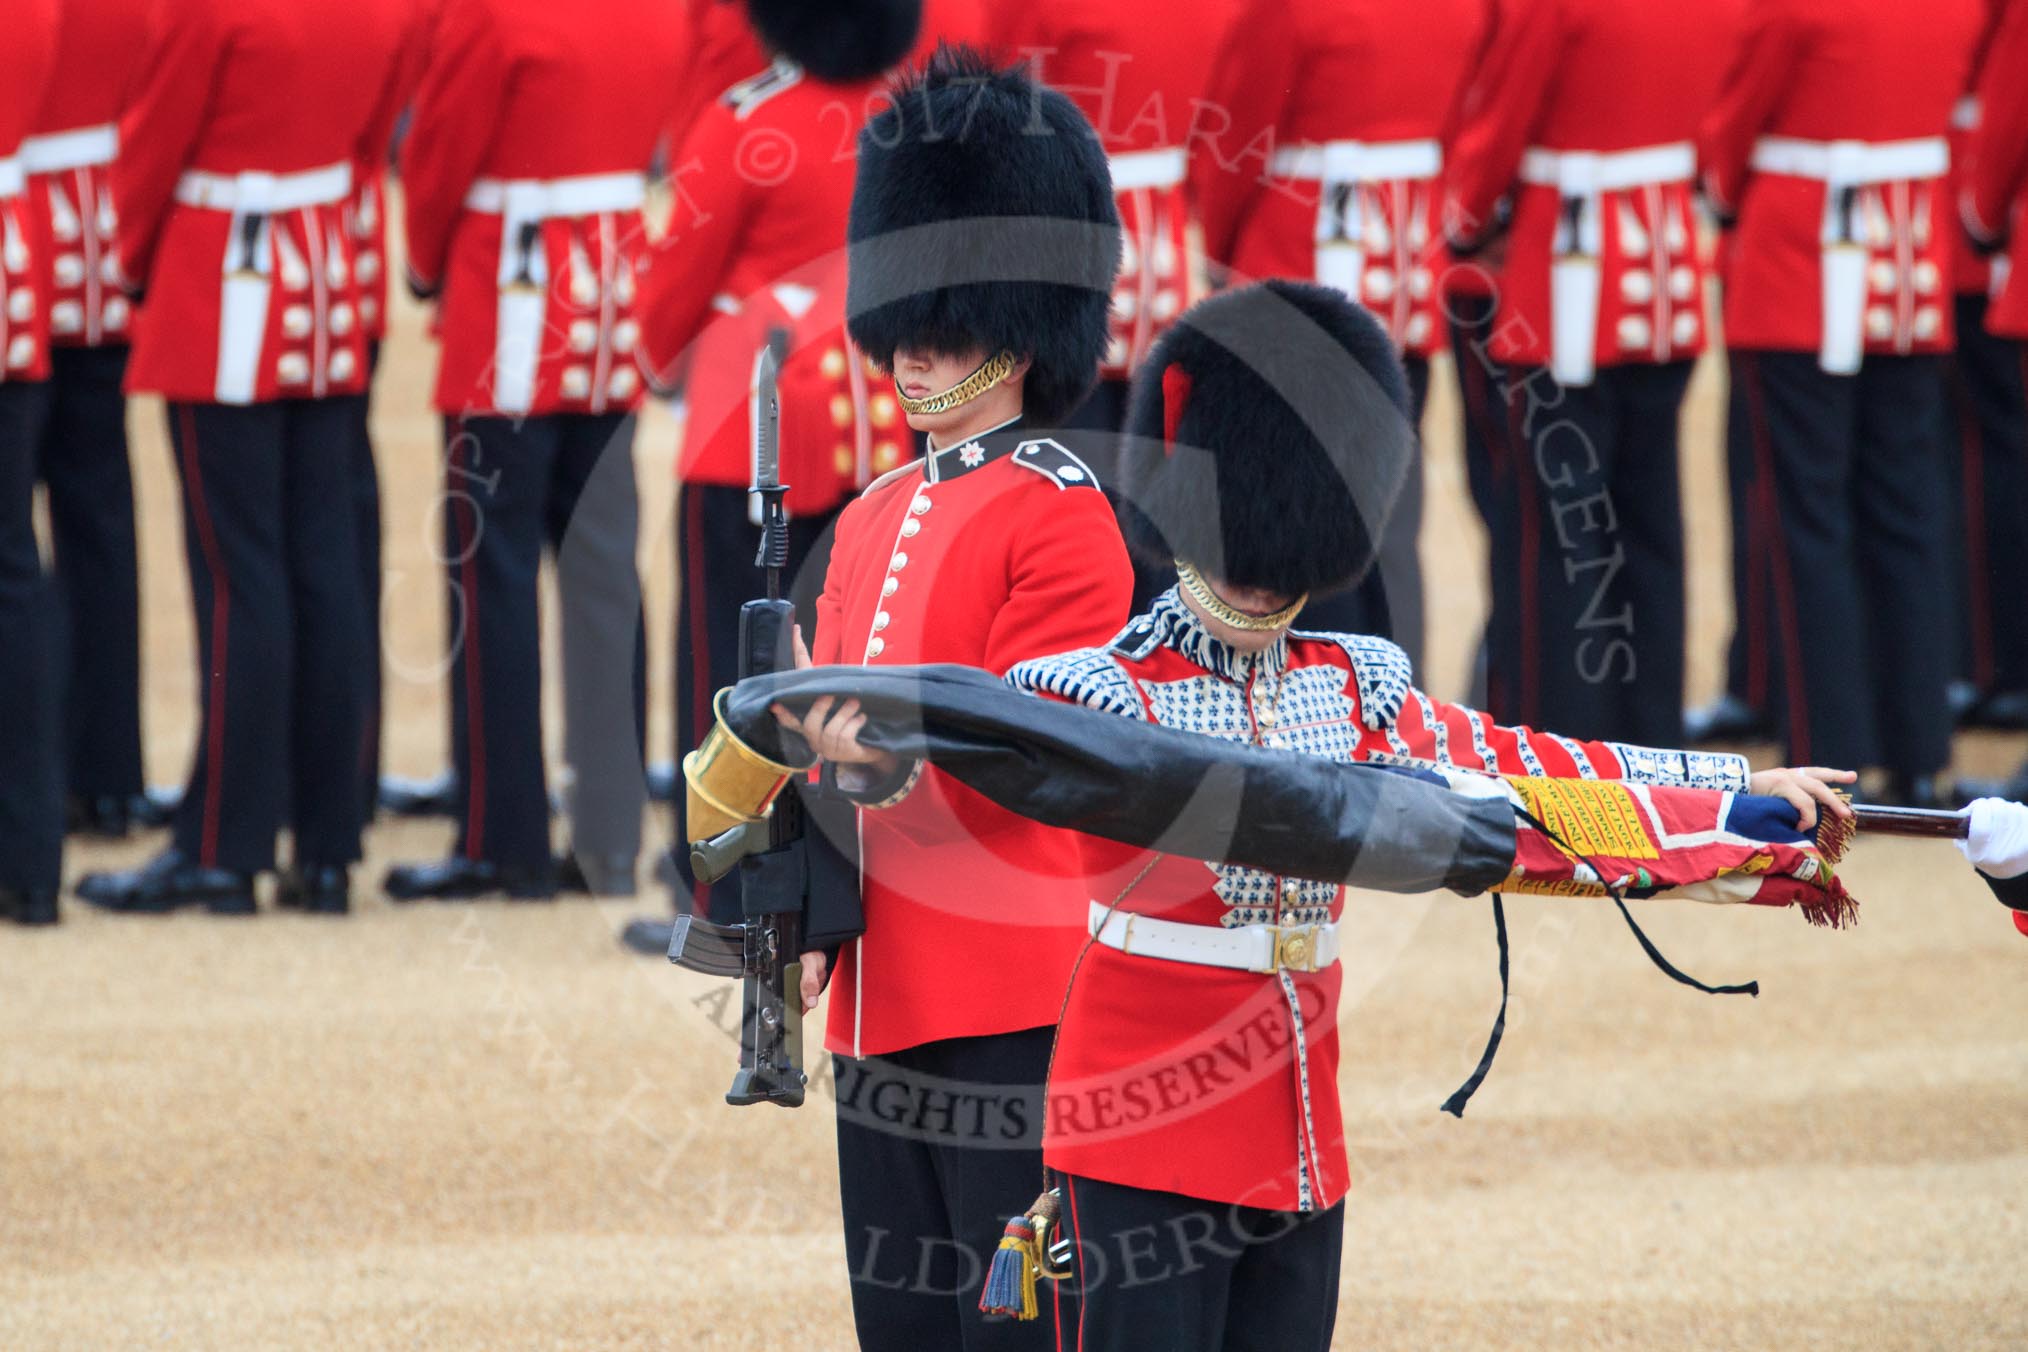 Duty Drummer  Sam Orchard uncasing the Colour. Behind him Colour Sentry Guardsman Jonathon Hughes (26) during The Colonel's Review 2018 (final rehearsal for Trooping the Colour, The Queen's Birthday Parade)  at Horse Guards Parade, Westminster, London, 2 June 2018, 10:33.